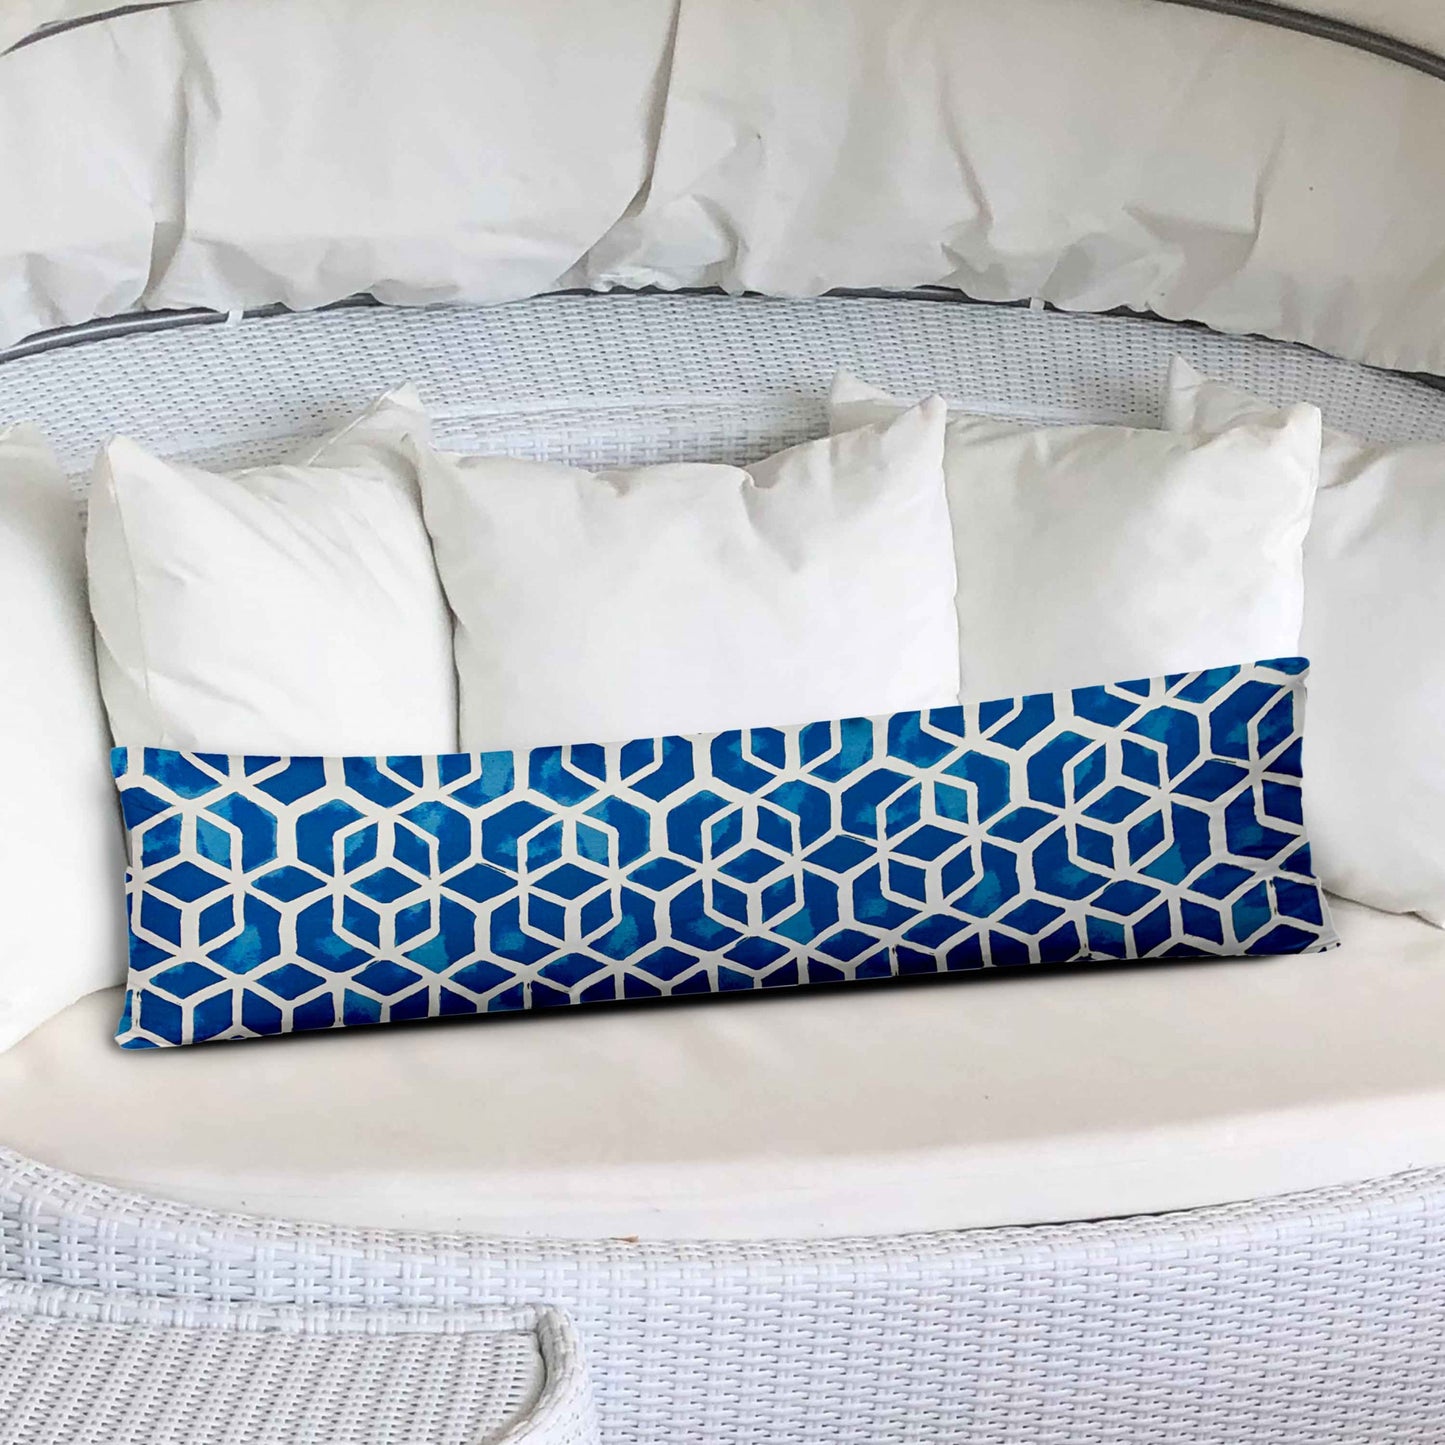 12" X 48" Blue And White Enveloped Geometric Lumbar Indoor Outdoor Pillow